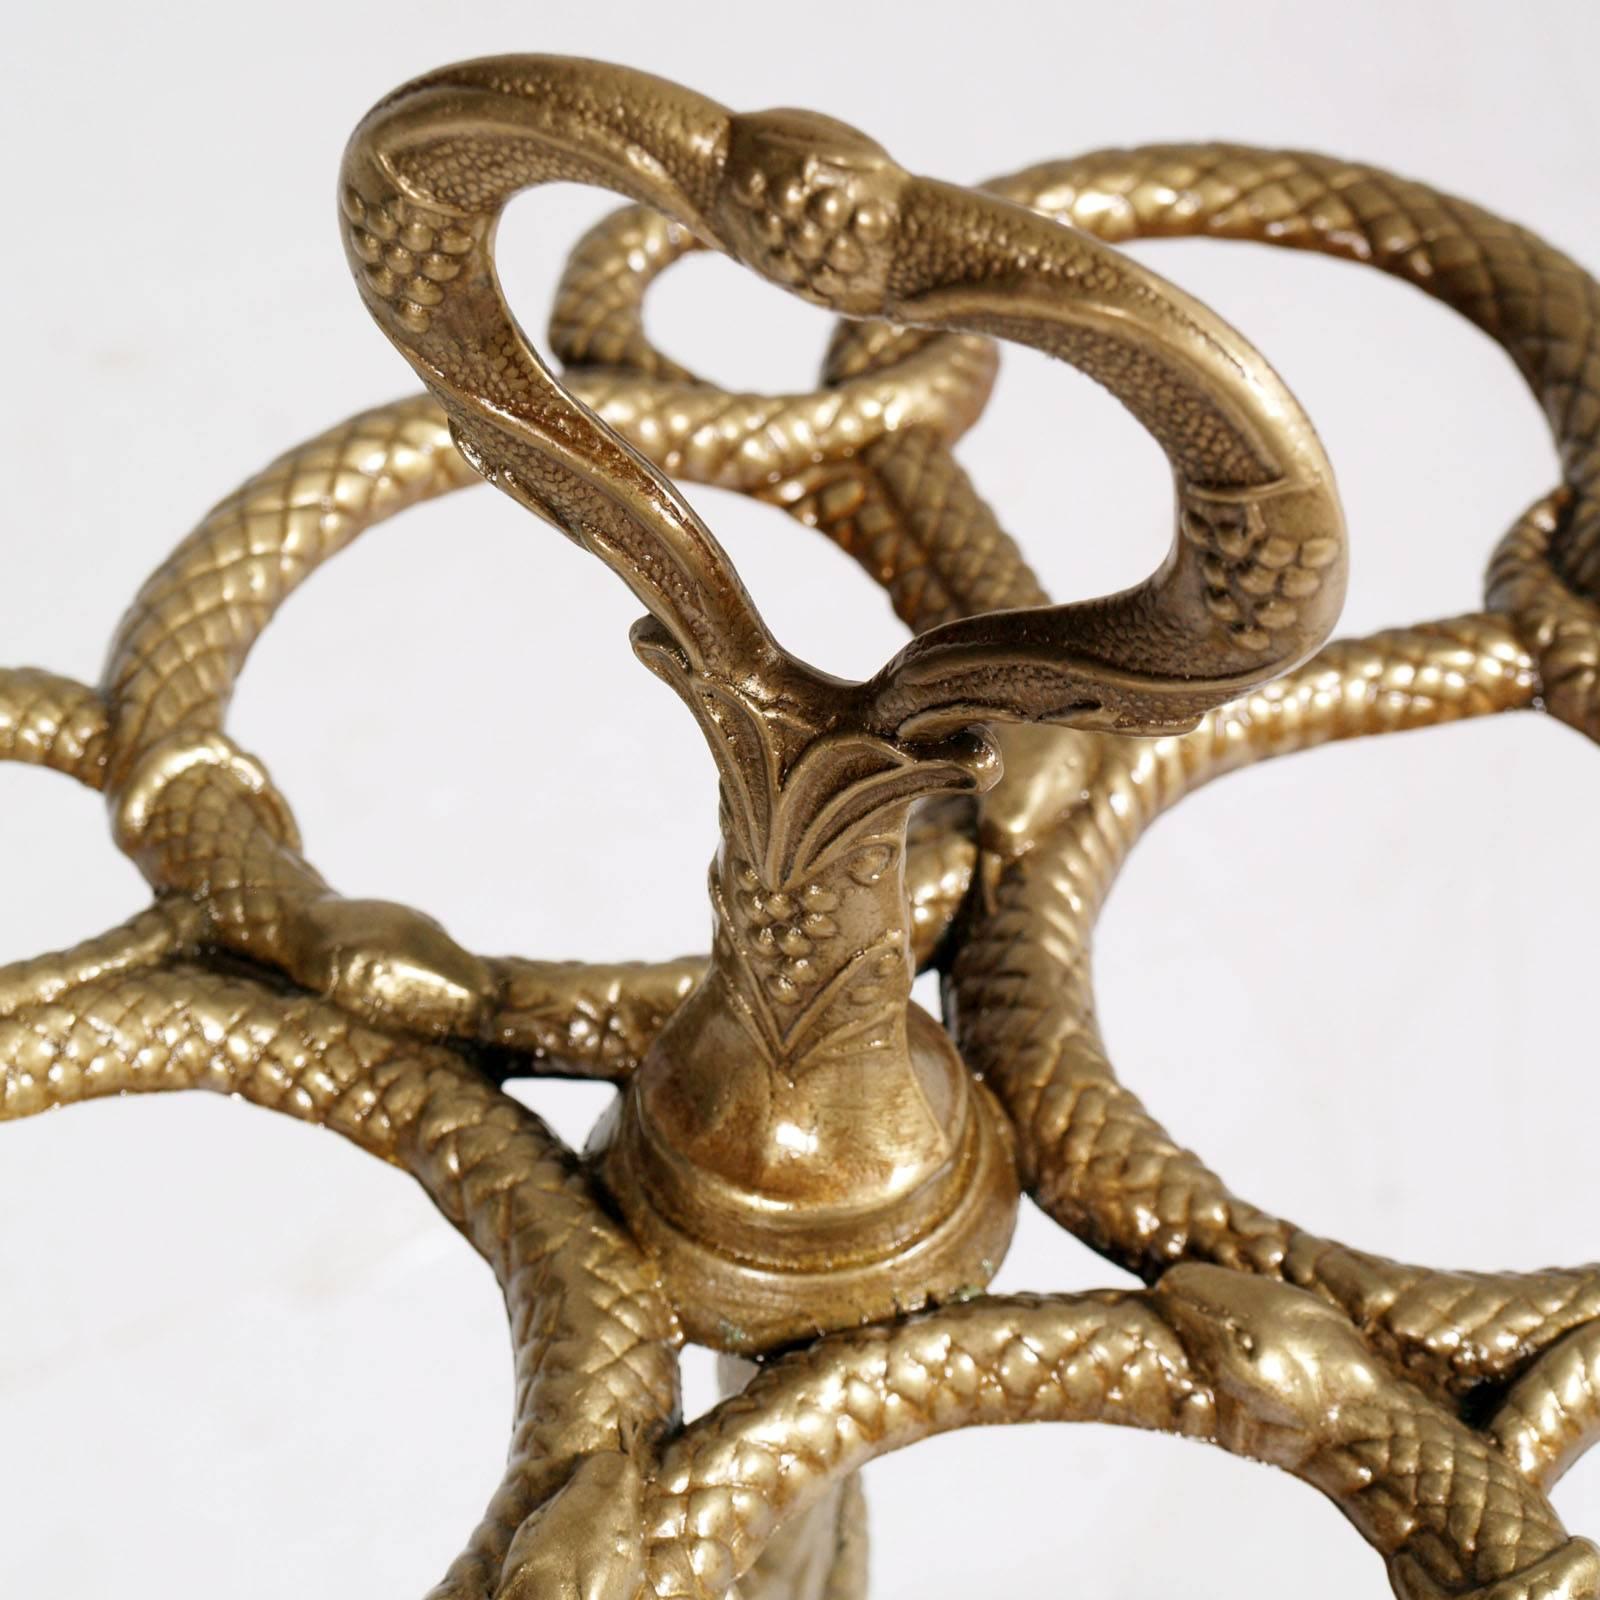 Italian Art Nouveau Gilded Bronz Umbrella Stand Richly Decorated Snakes and Floral Motif